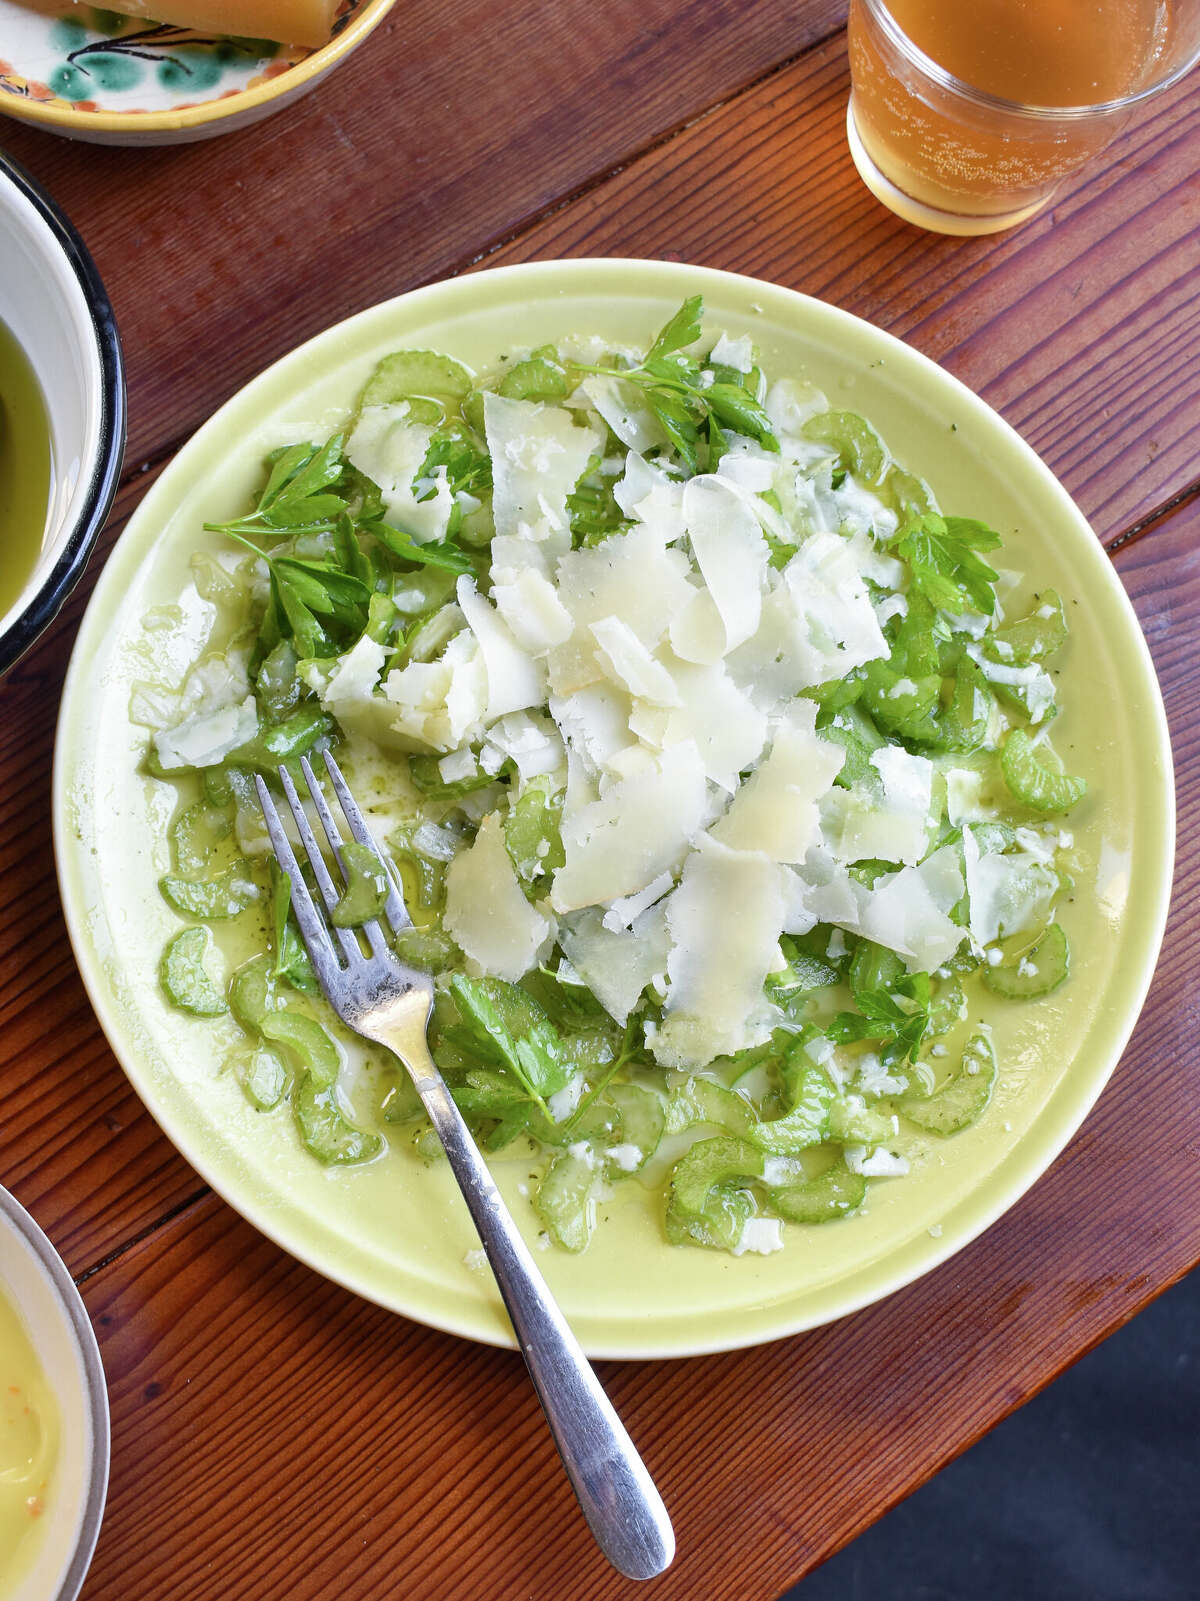 This crisp celery salad is inspired by Auckland restaurant Day Trip's version.